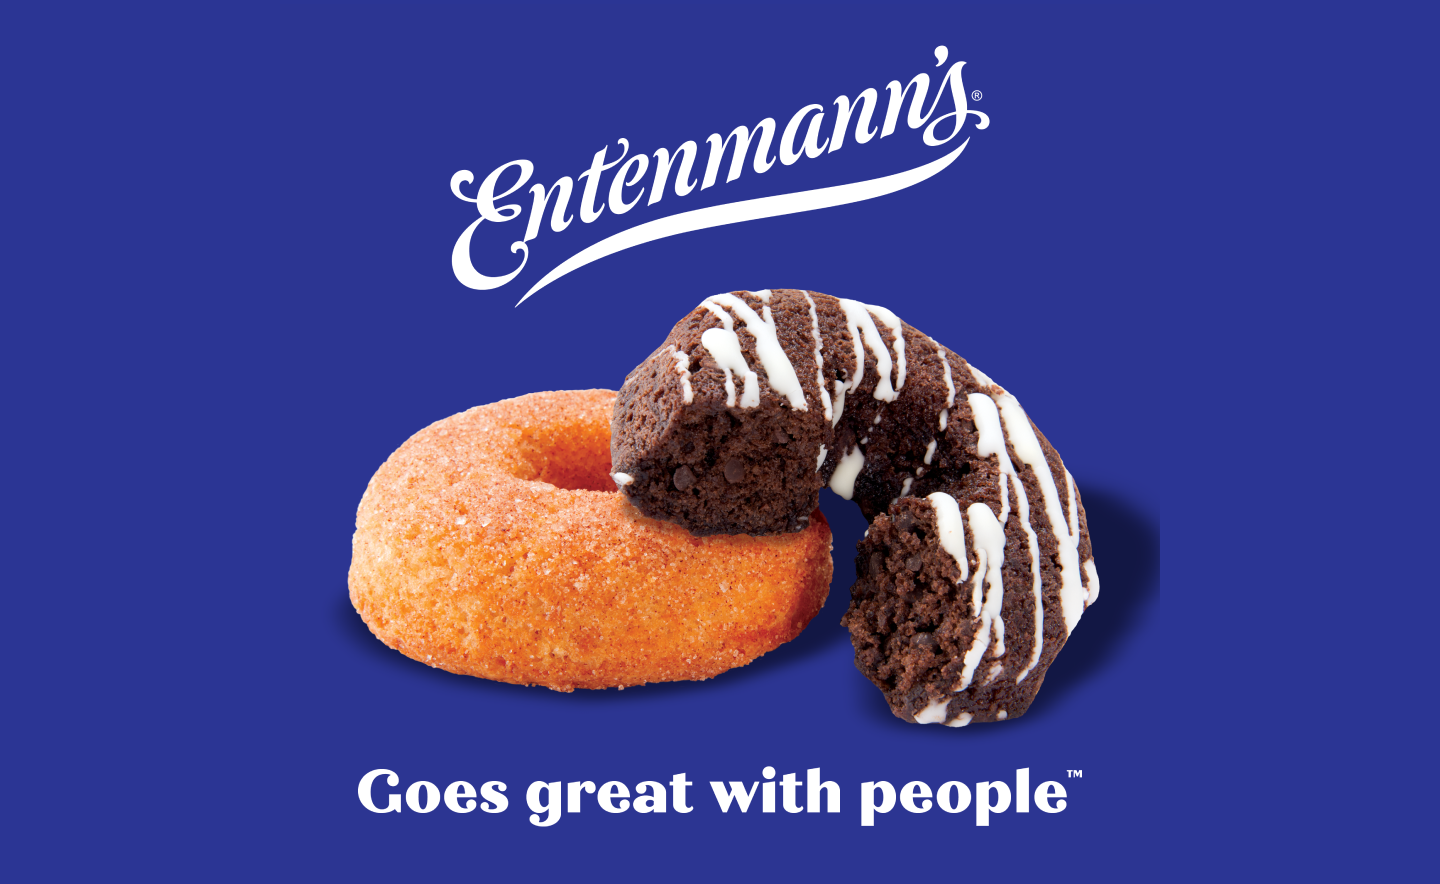 Entenmann's Donut Cakes. Goes great with people. TM